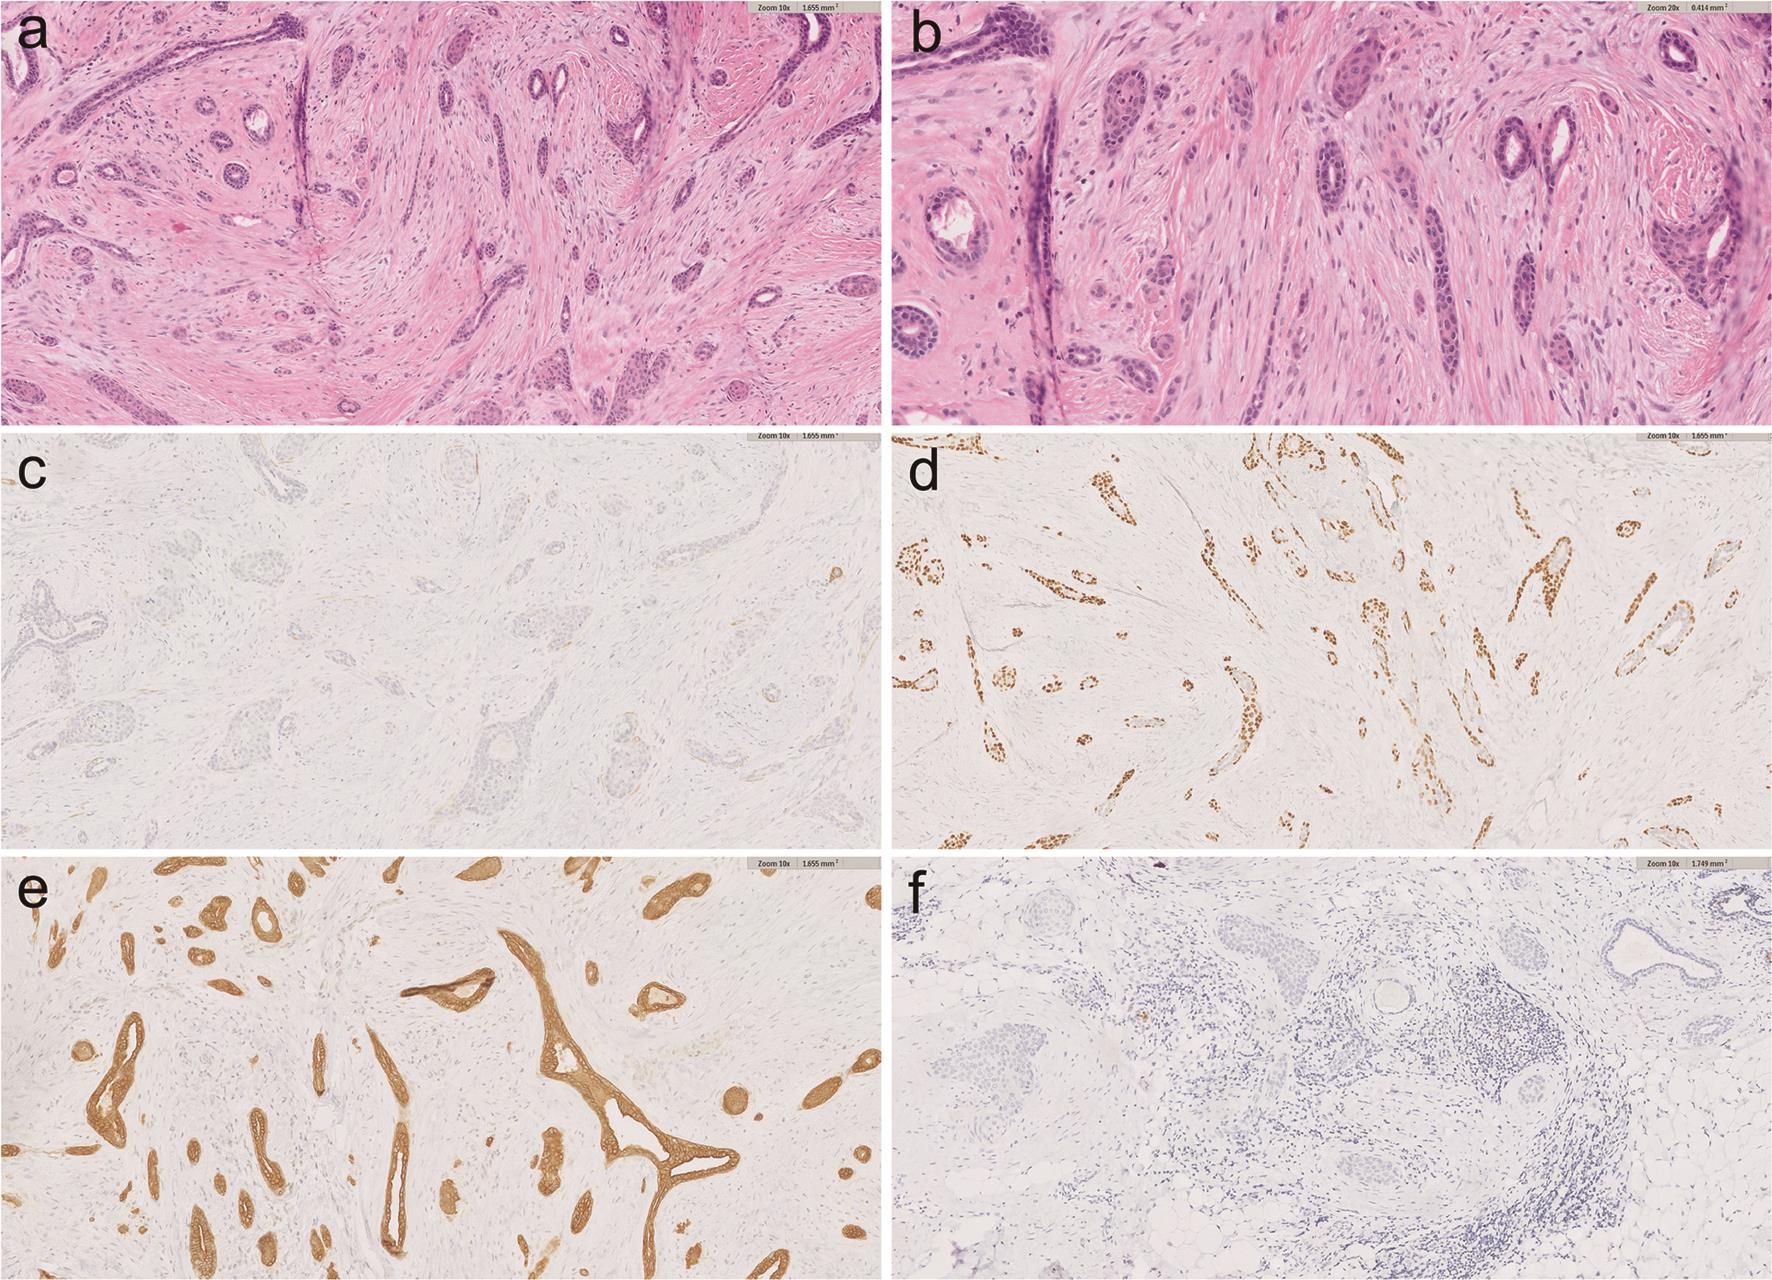 Low-grade adenosquamous carcinoma of the breast shows infiltrative solid glandular ducts into surrounding stroma (a), which are composed of low-grade, bland looking cells with squamous and glandular components (b). Myoepithelial cells are absent around the tumor in smooth muscle myosin heavy chain (SMMS) staining (c). The tumor cells are diffusely positive for p40 (d) and cytokeratin 5 (CK5) (e), but negative for estrogen receptor (ER) (f). b, ×20; others, ×10.